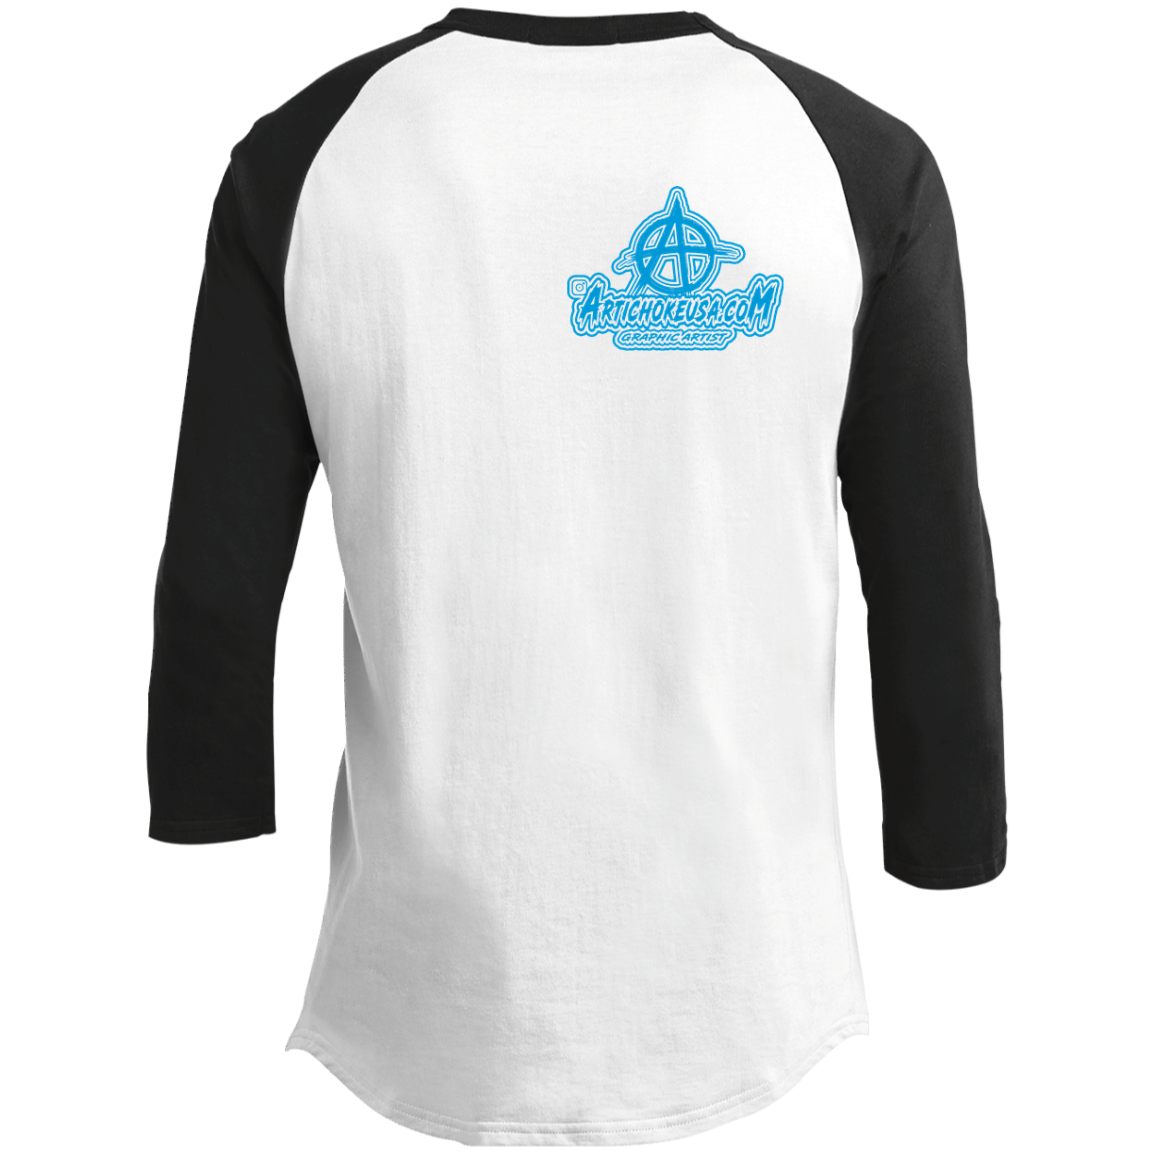 ArtichokeUSA Character and Font design. Let's Create Your Own Team Design Today. My first client Charles. Men's 3/4 Raglan Sleeve Shirt